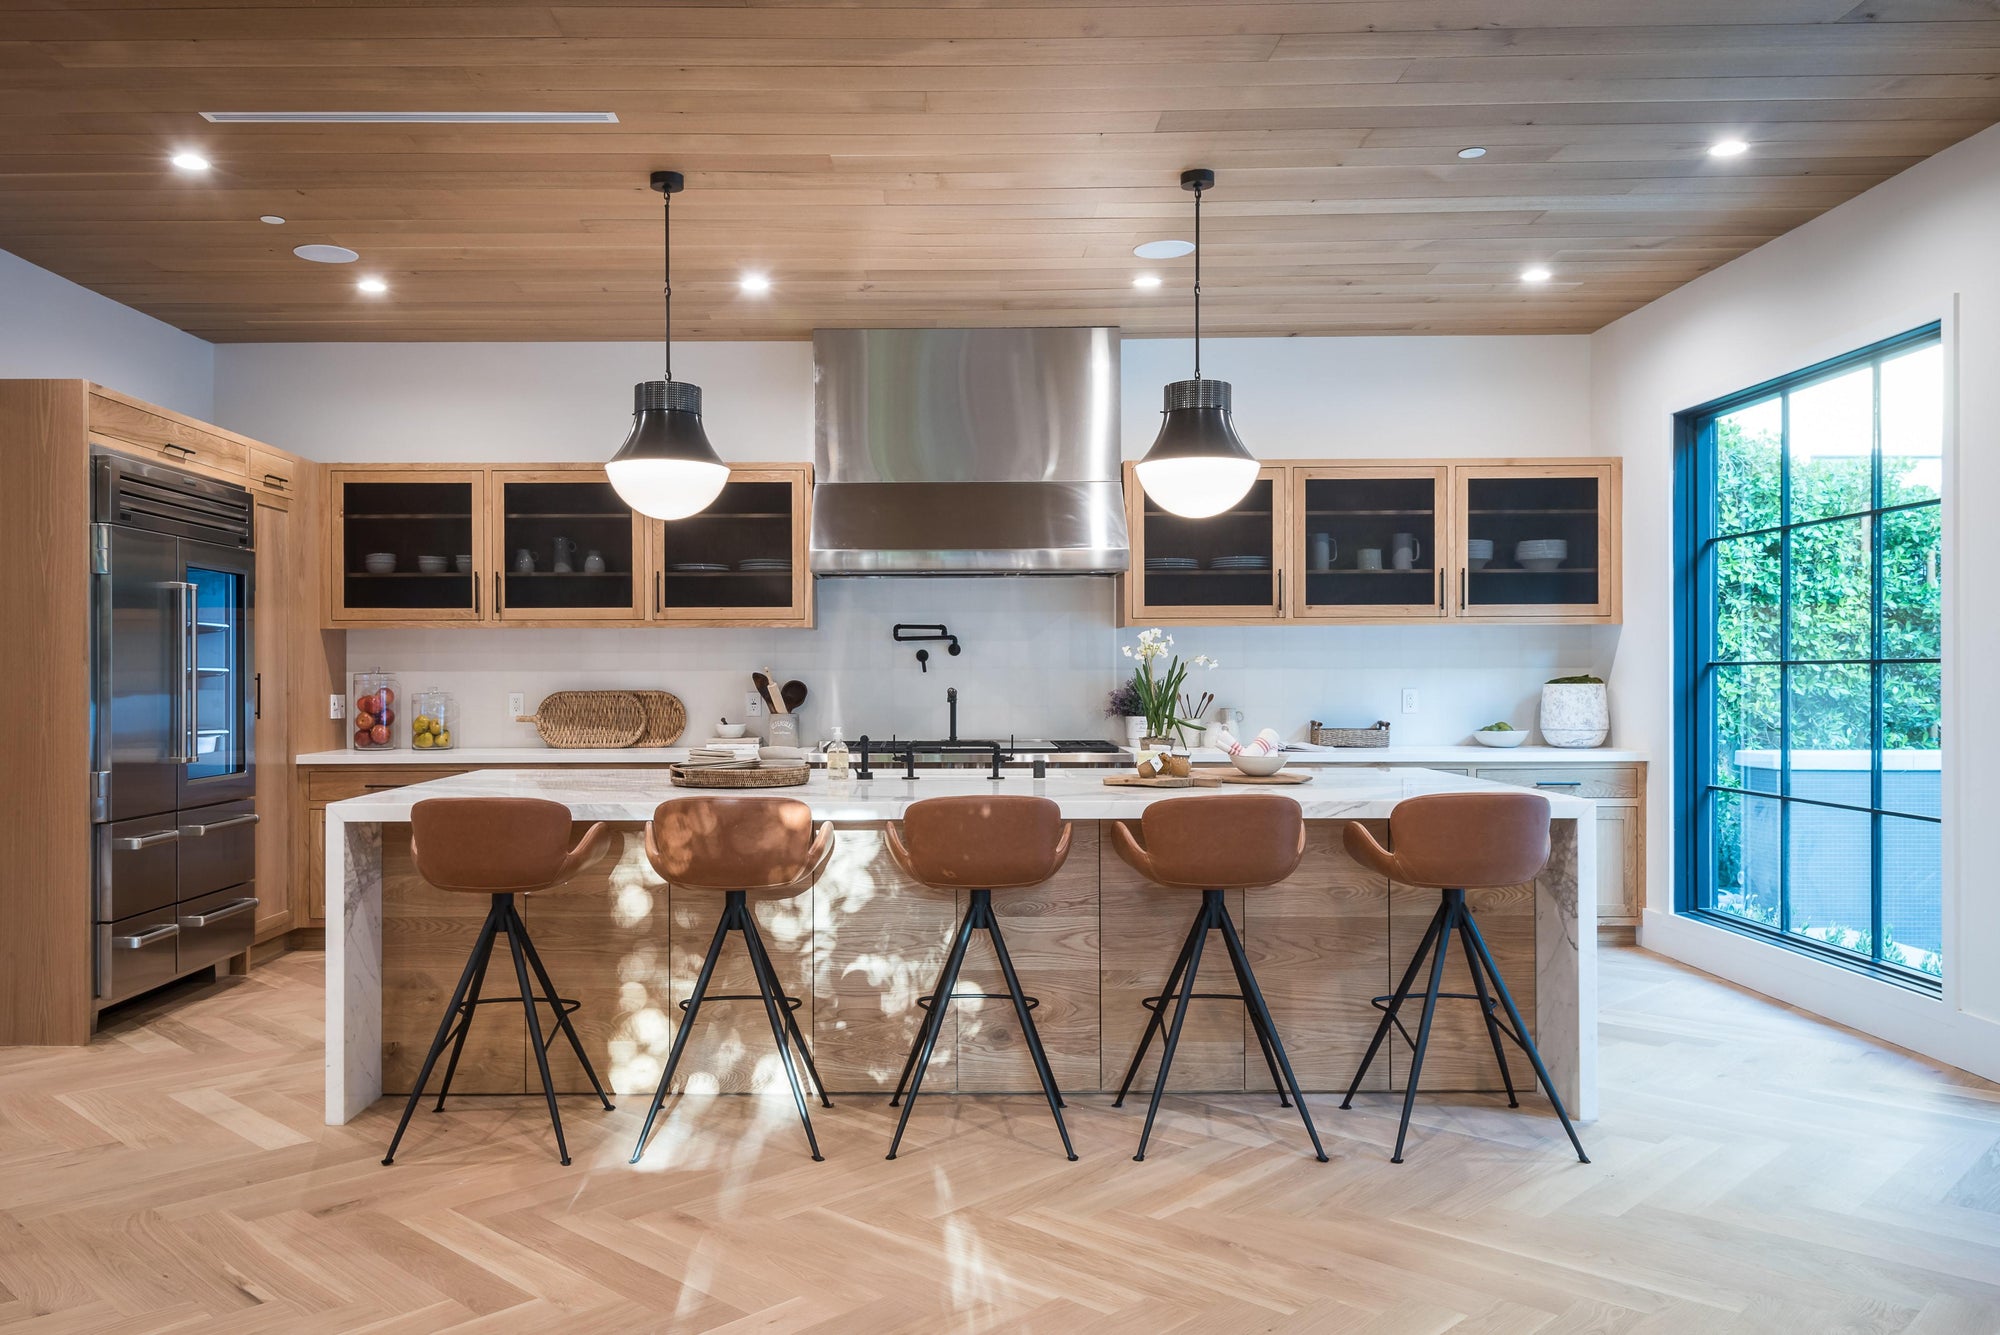 Tips for Finding the Right Kitchen Furniture and Lighting